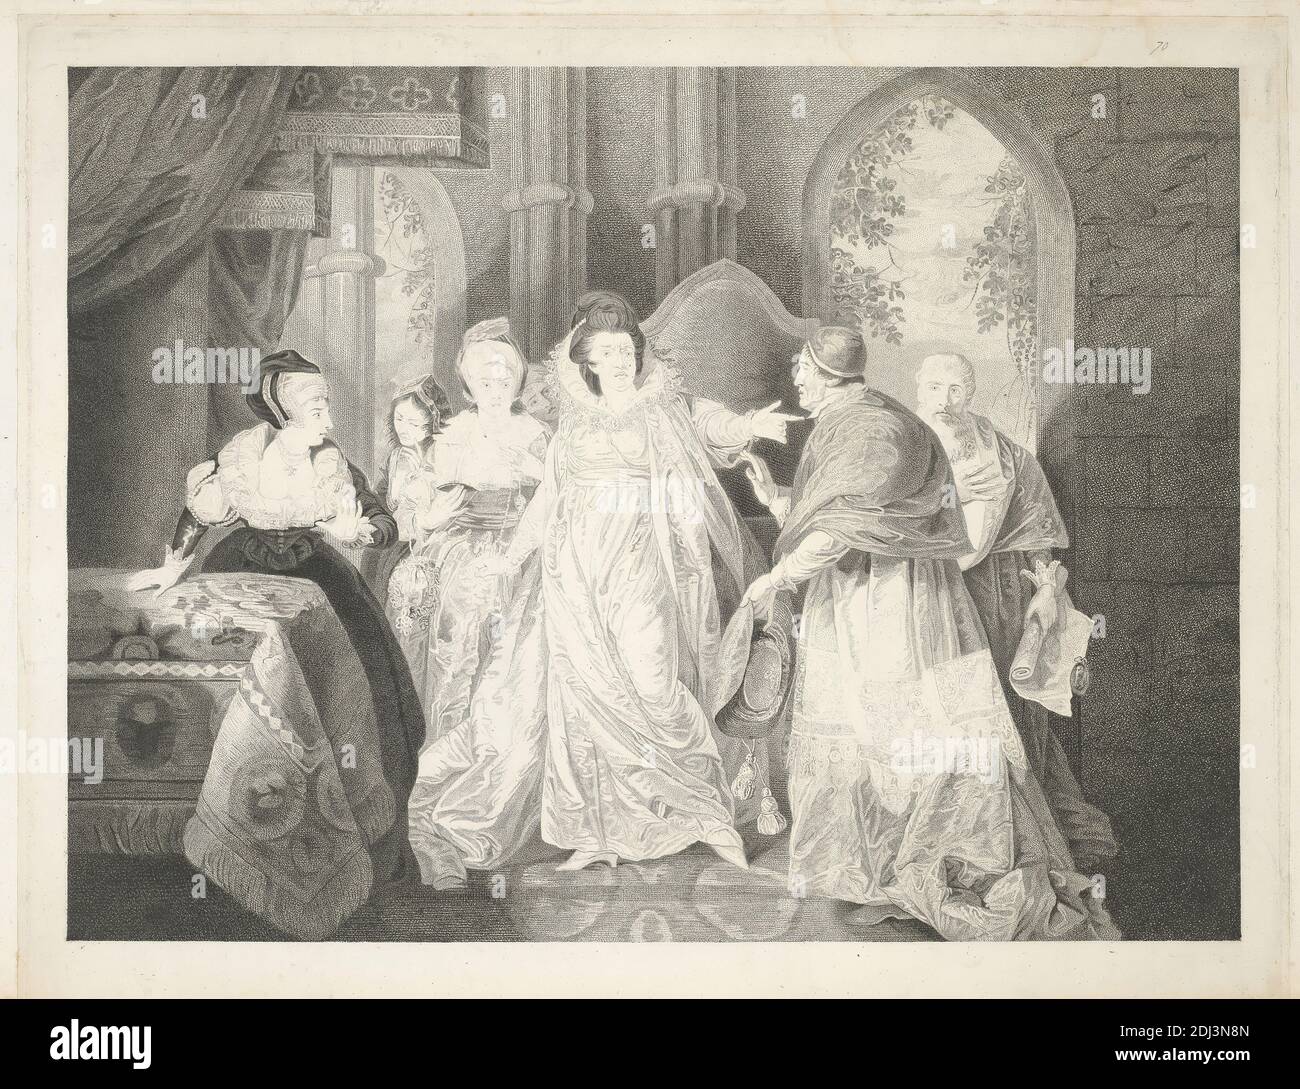 Henry VIII: Act III, Scene I, A Room in the Queen's Apartments, Robert Thew, 1758–1802, British, after Matthew William Peters, 1742–1814, British, 1803, Engraving, Sheet: 17 3/8 x 23 1/4in. (44.1 x 59.1cm Stock Photo